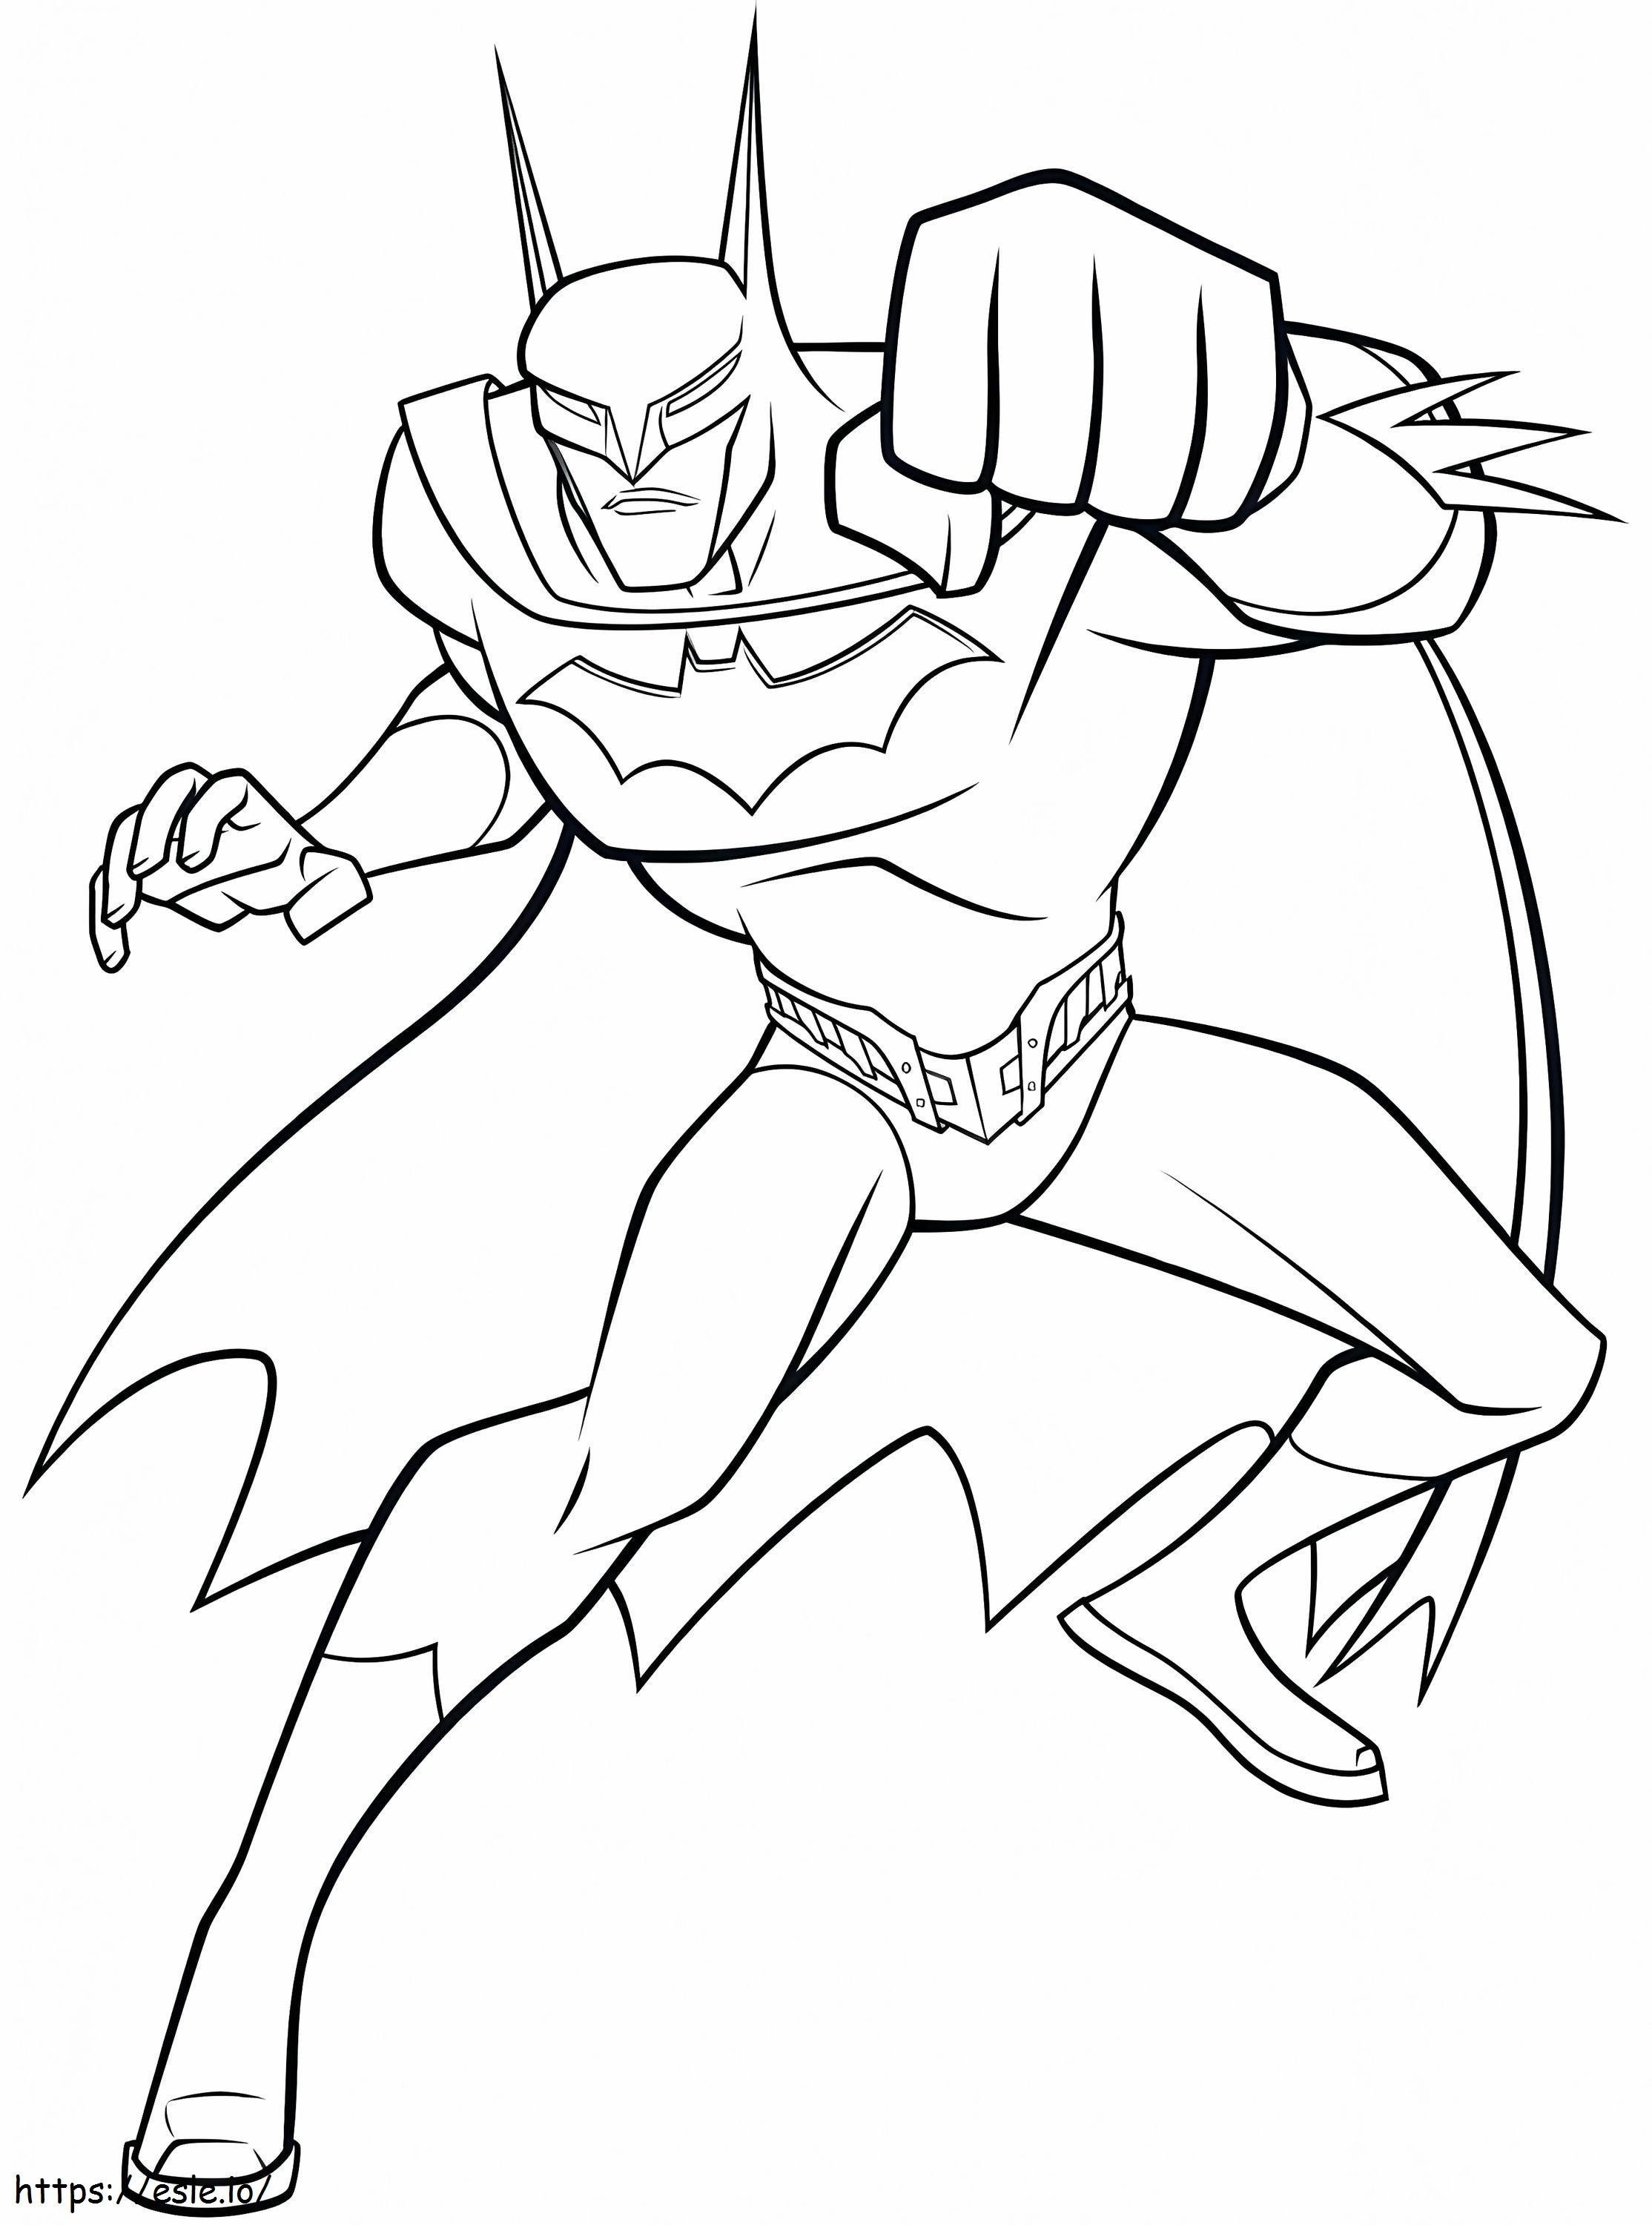 Batman Is Cool coloring page